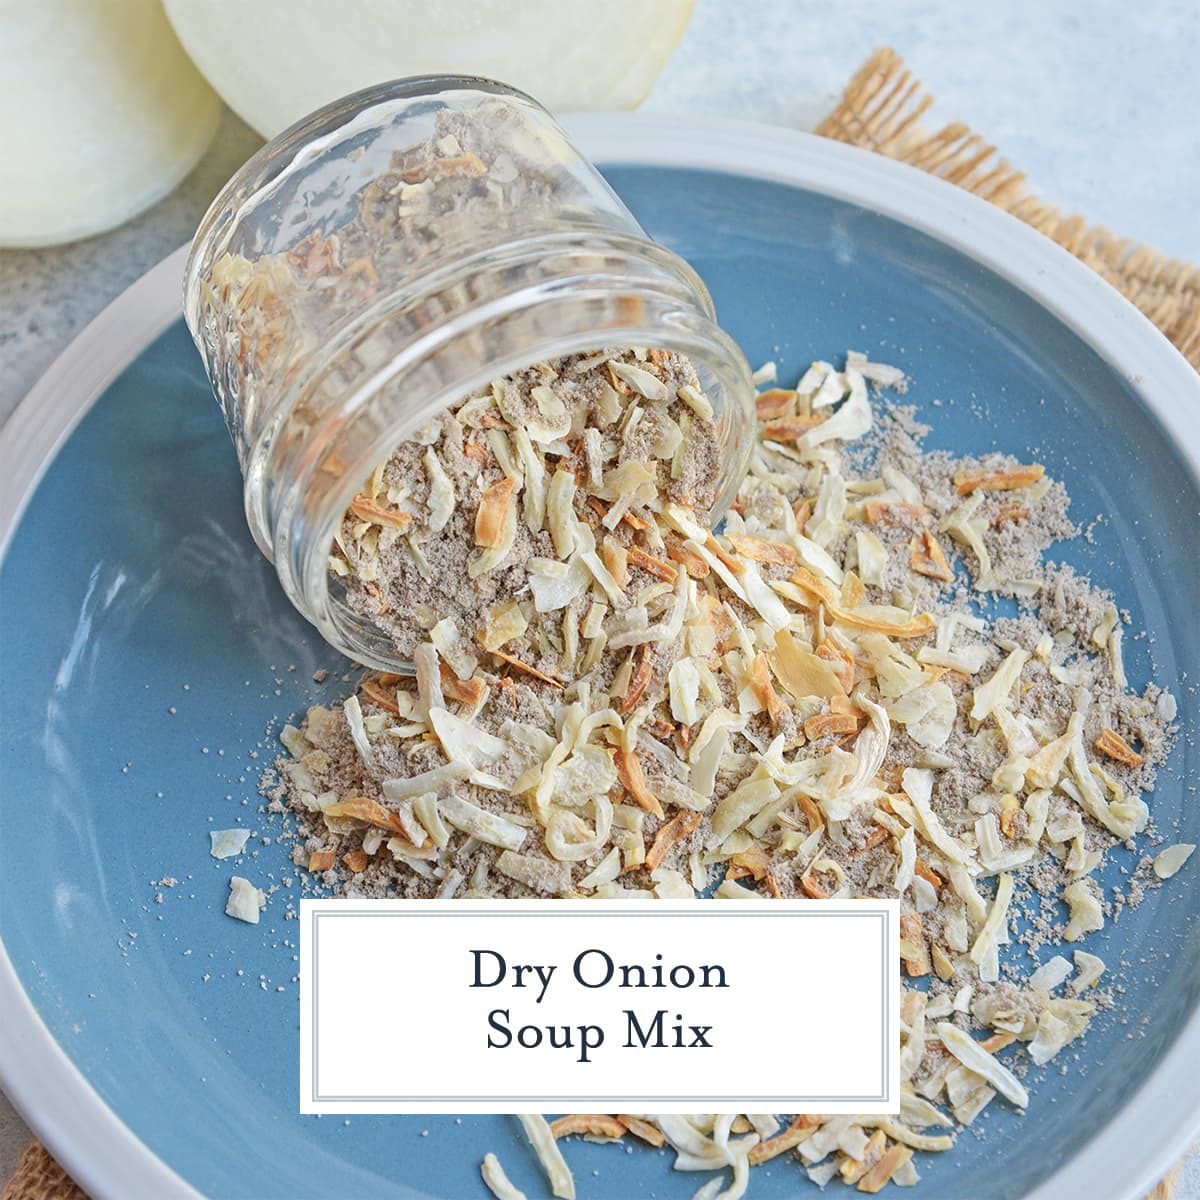 Homemade French Onion Soup Mix - Savory Experiments